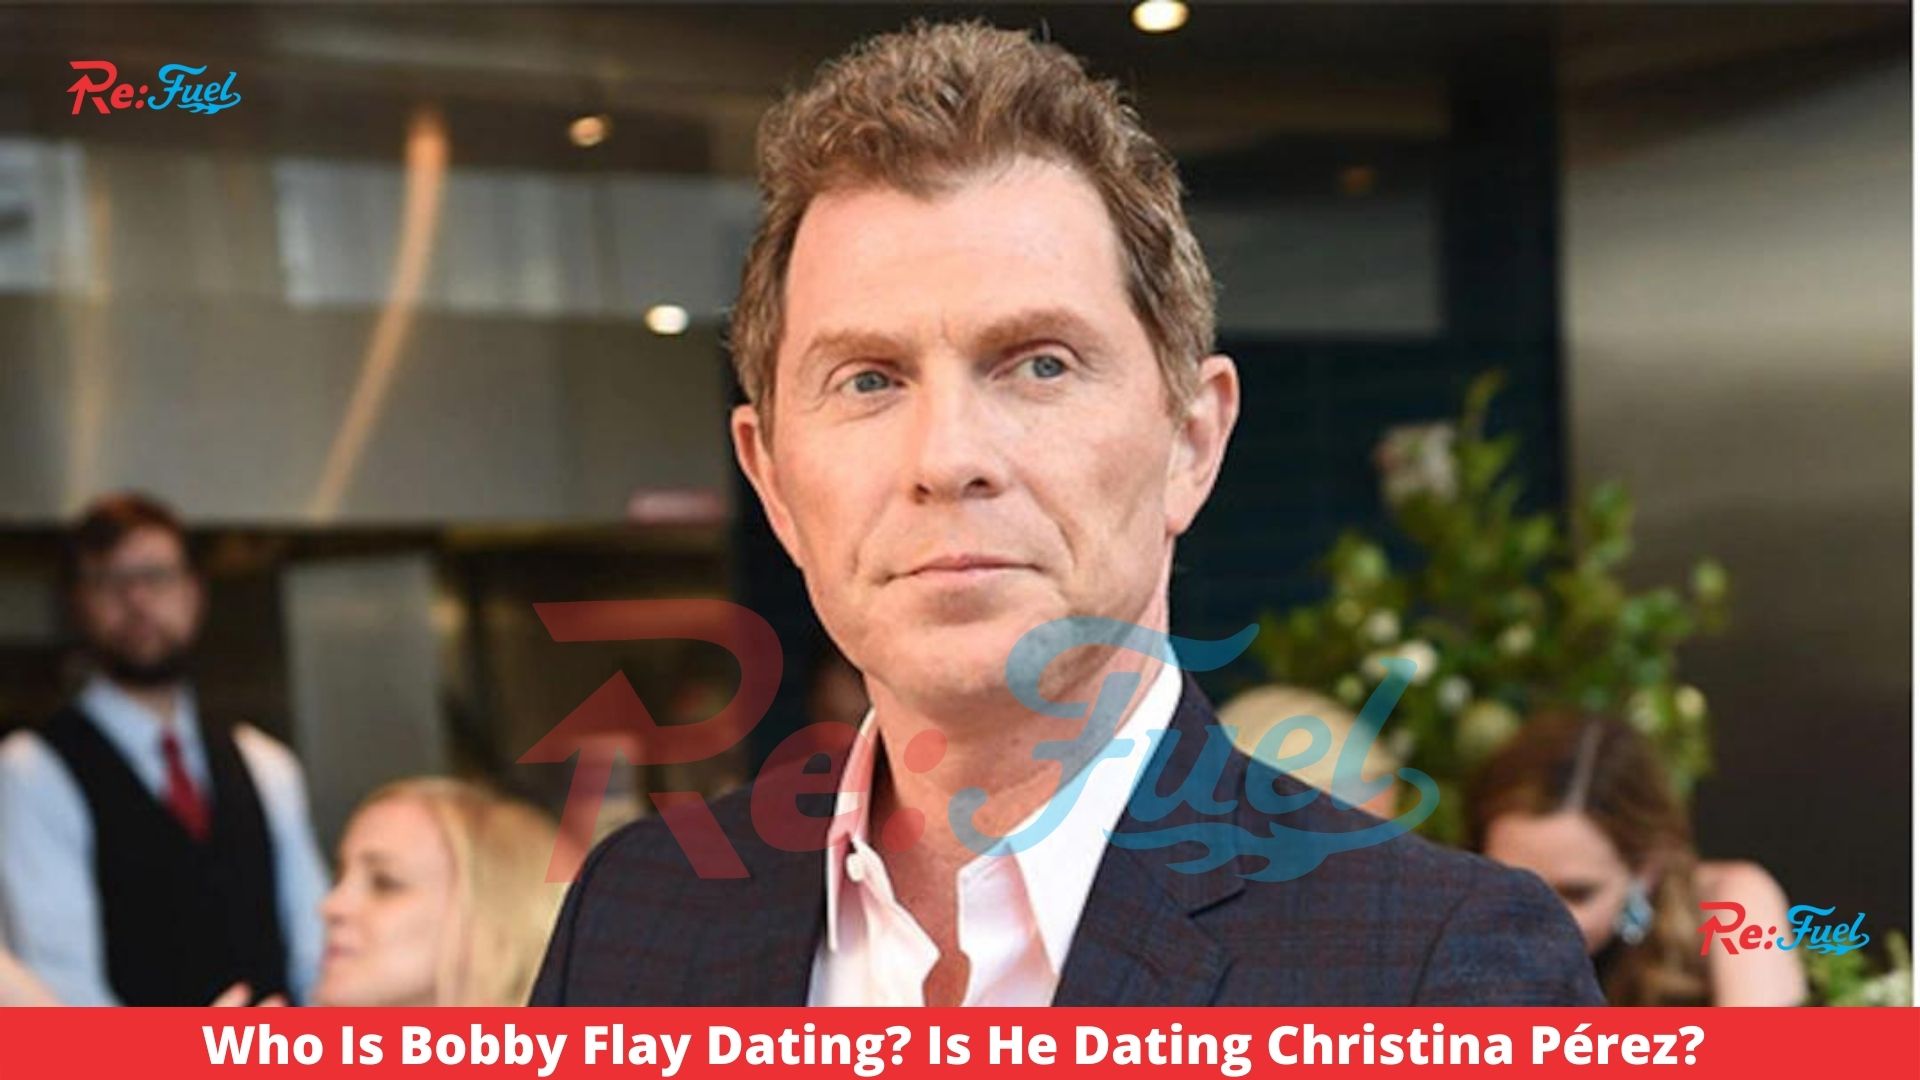 Who Is Bobby Flay Dating? Is He Dating Christina Pérez?